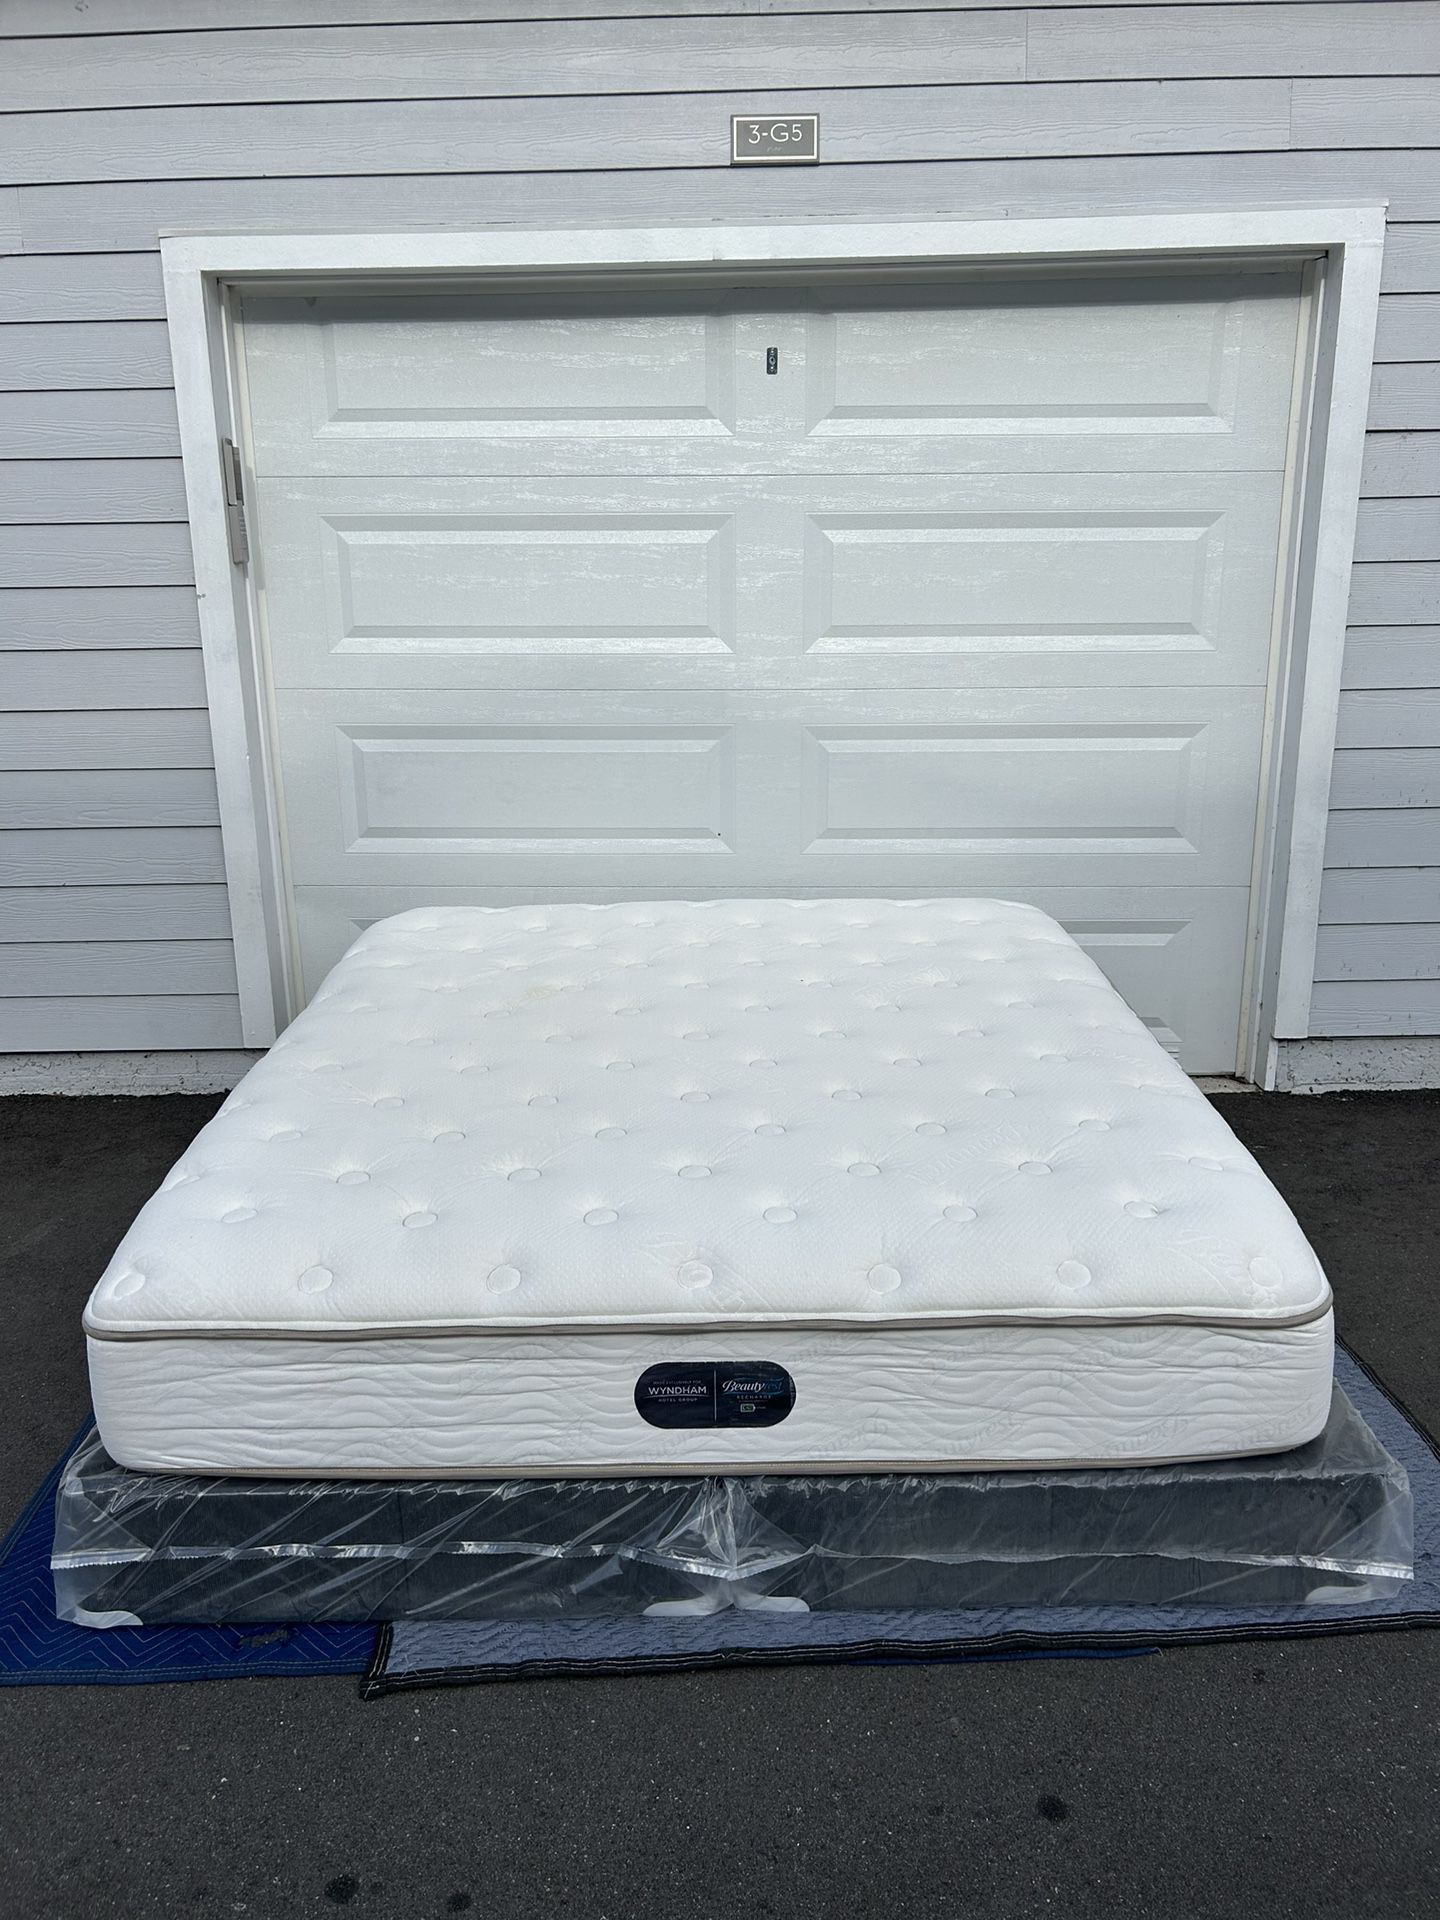 King Mattress BEAUTY REST Recharge with Box Springs Great Condition - Delivery Negotiable